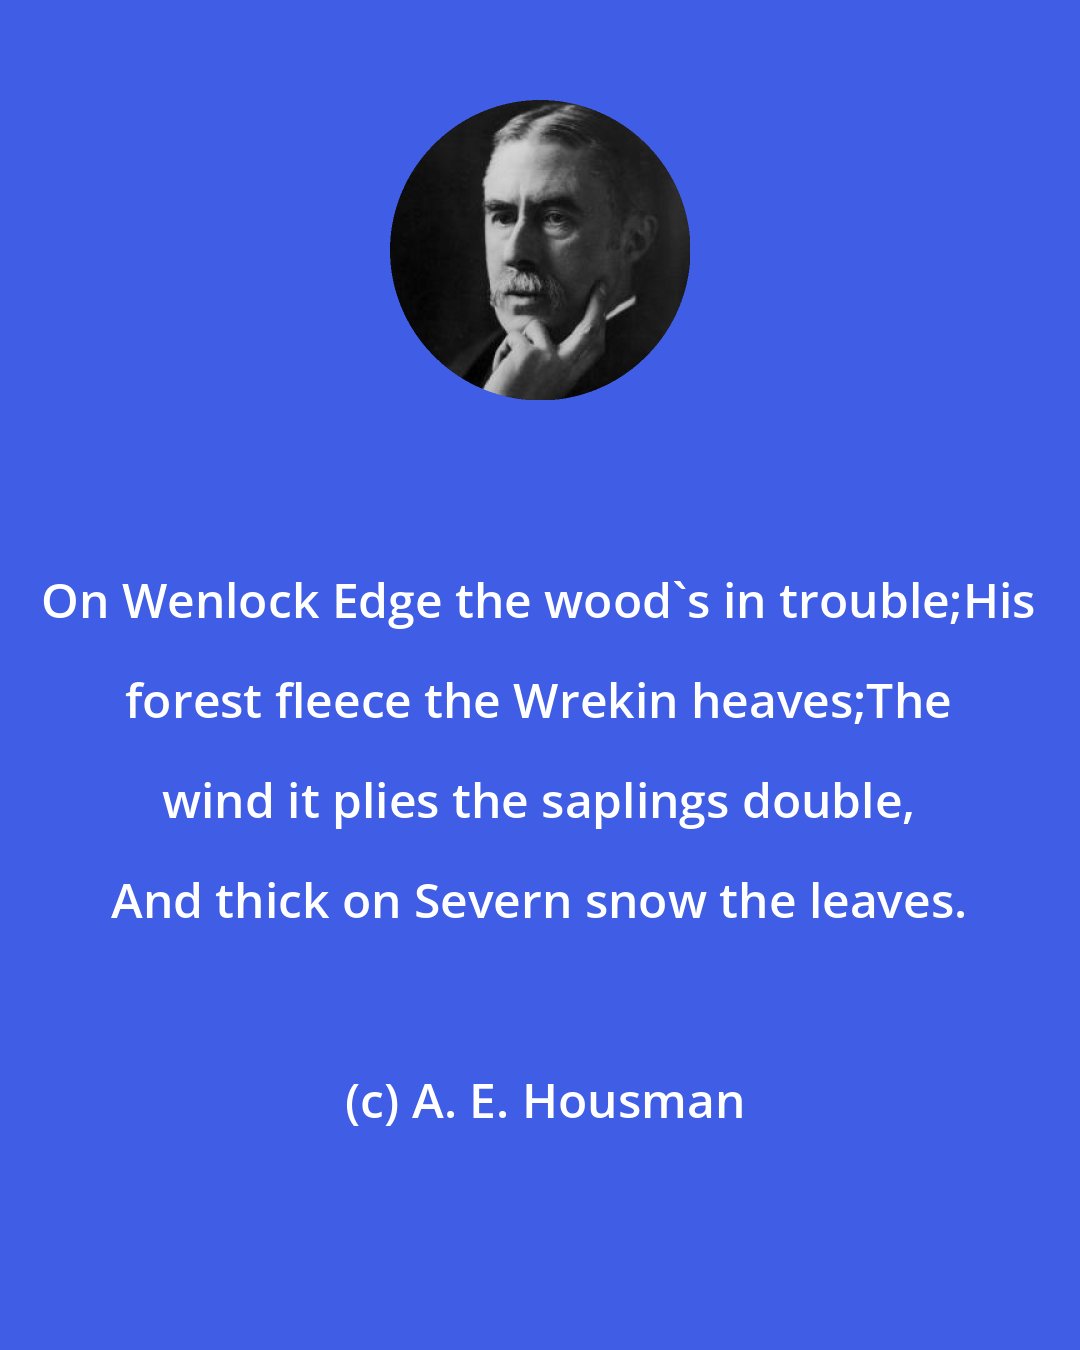 A. E. Housman: On Wenlock Edge the wood's in trouble;His forest fleece the Wrekin heaves;The wind it plies the saplings double, And thick on Severn snow the leaves.